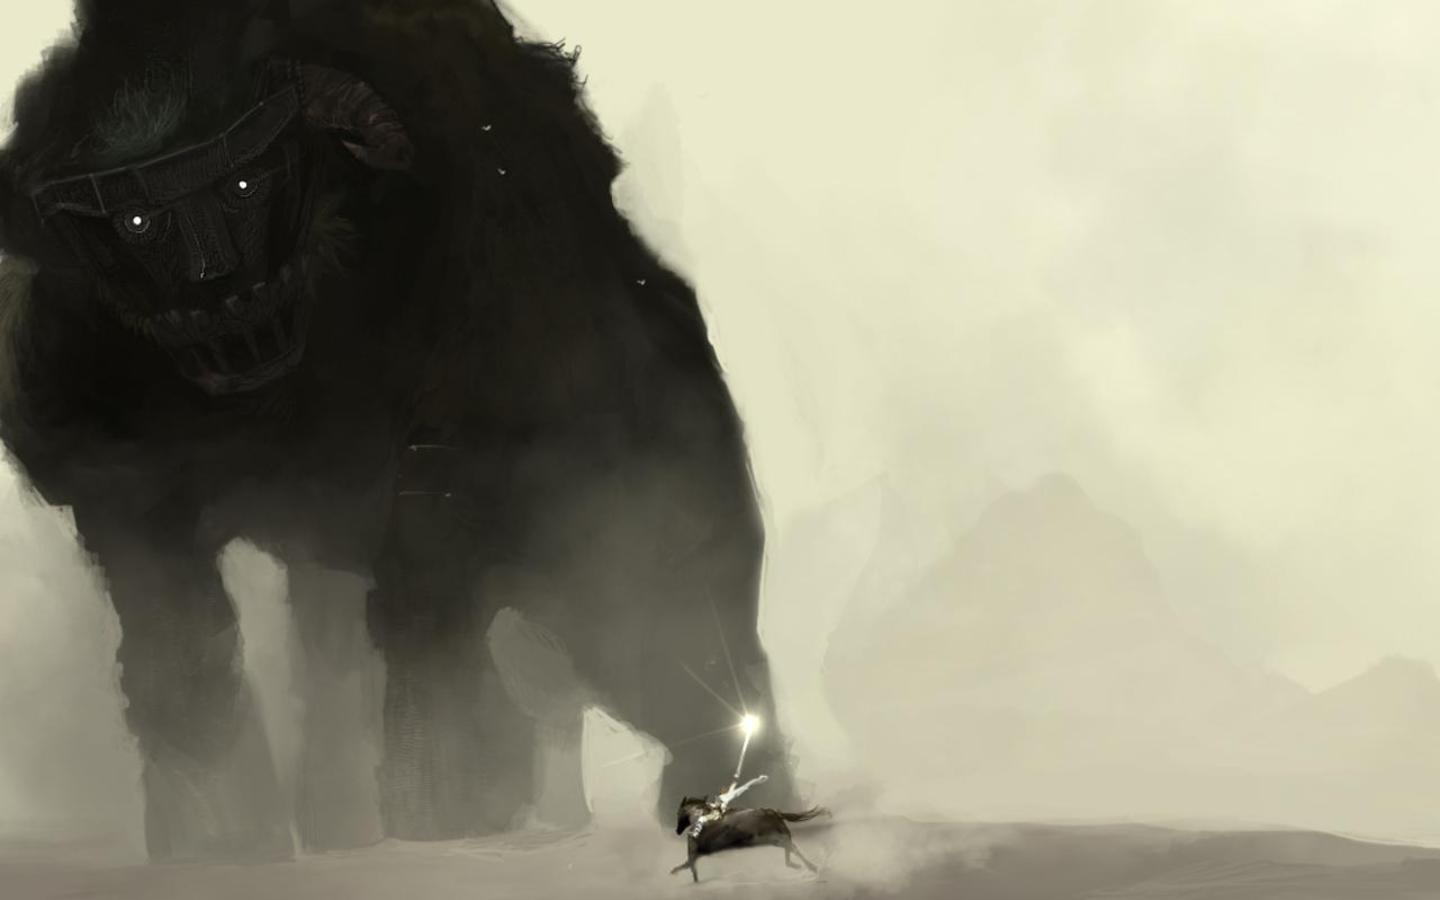 Shadow Of The Colossus Hd Wallpapers For Pc - Wallpaperforu